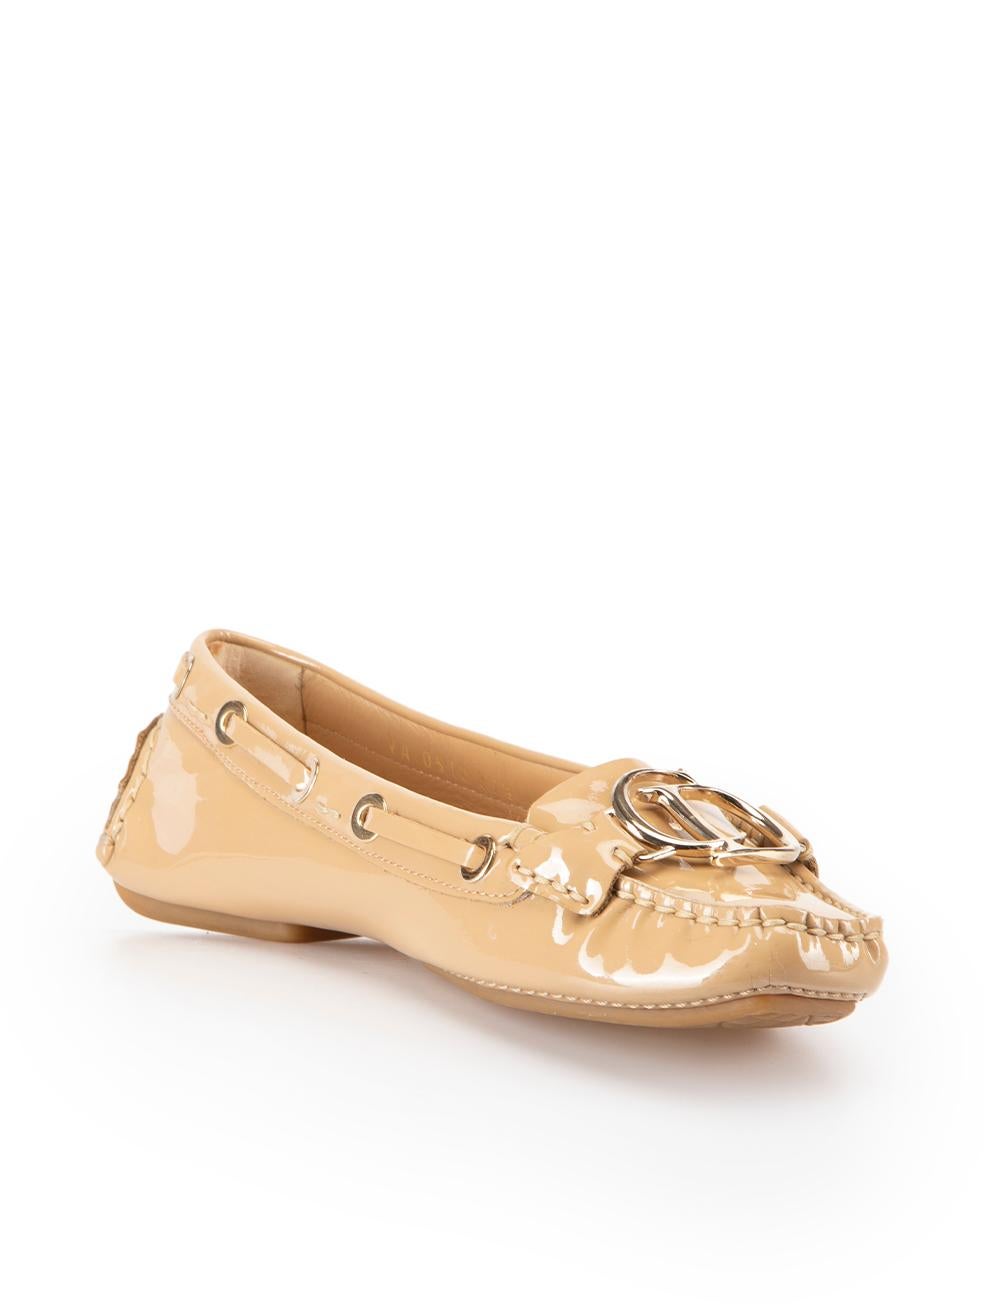 CONDITION is Very good. Hardly any visible wear to loafers is evident on this used Dior designer resale item. Original shoebox included.



Details


Beige

Patent leather

Slip-on loafers

Square-toe

'CD' Buckle detail



 

Composition

EXTERIOR: